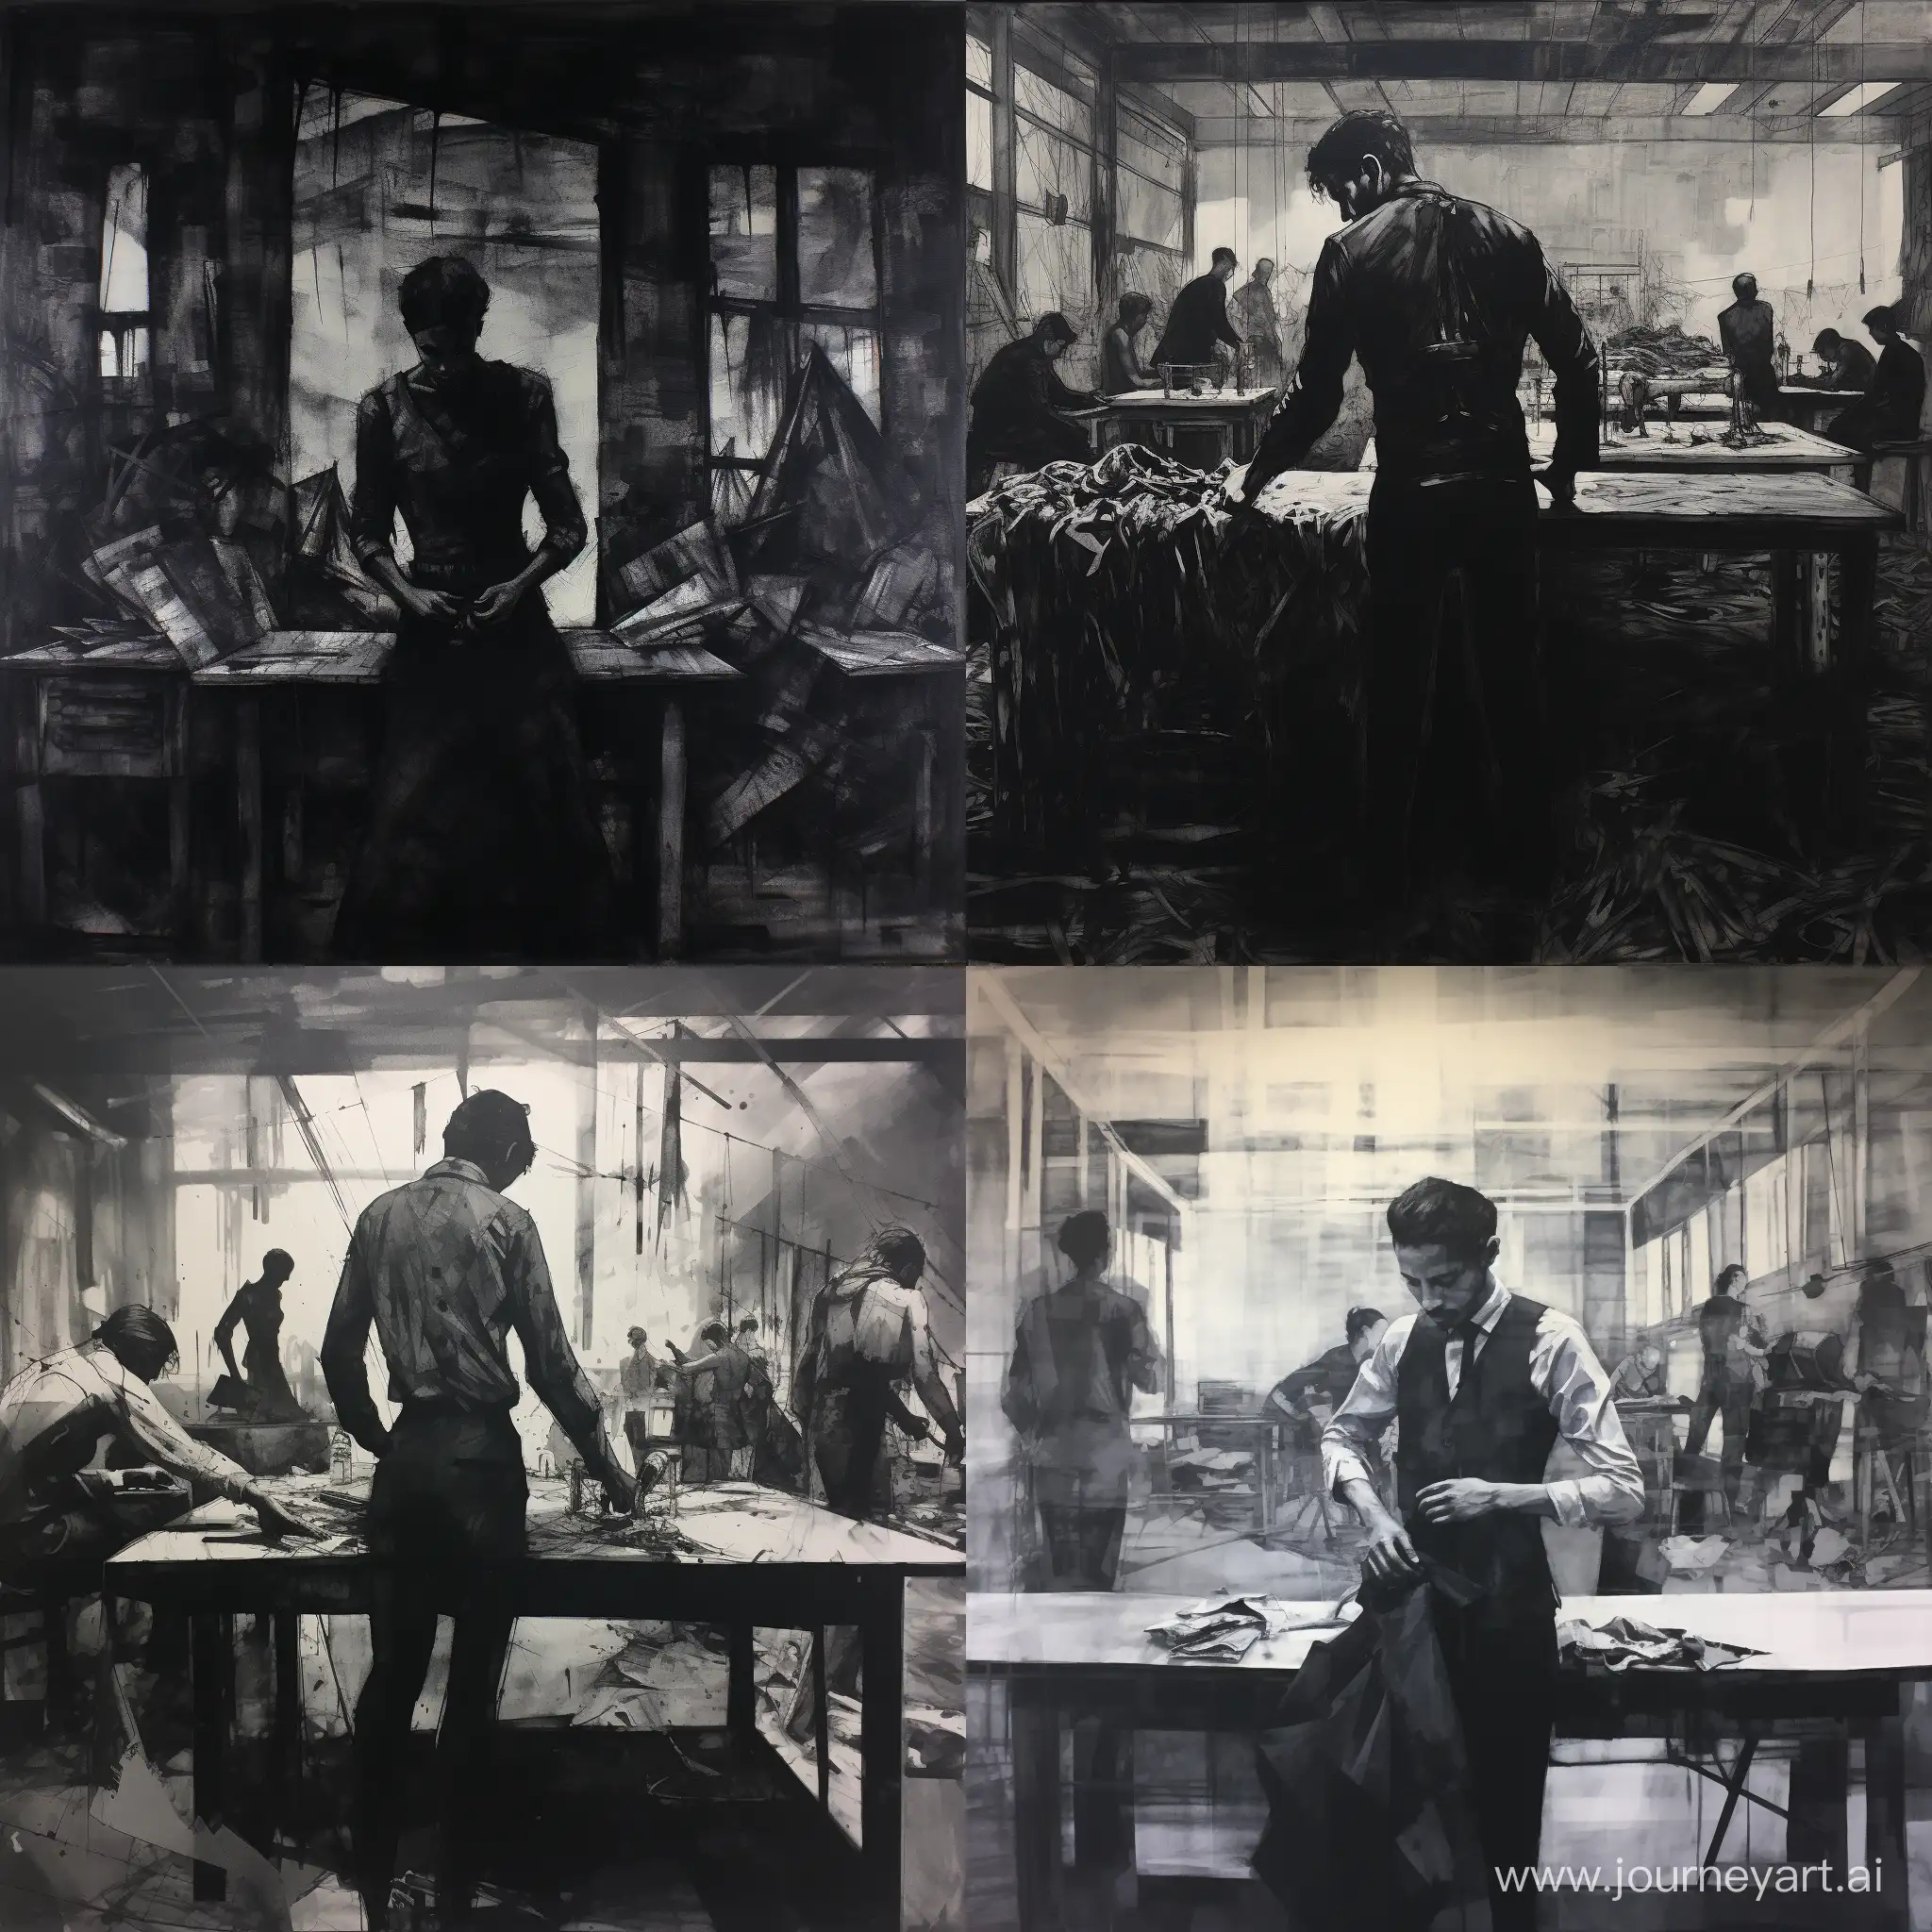 one labour in a torn clothes stands up on the desk, happily ballet dancing, inside a dense gloomy monochromatic post-industrial mechanical manufacture, full of monochromatic  labour in tuxedo doing their job soullessly, most are trying to ignore the man, but some staring with shame, ink sketch